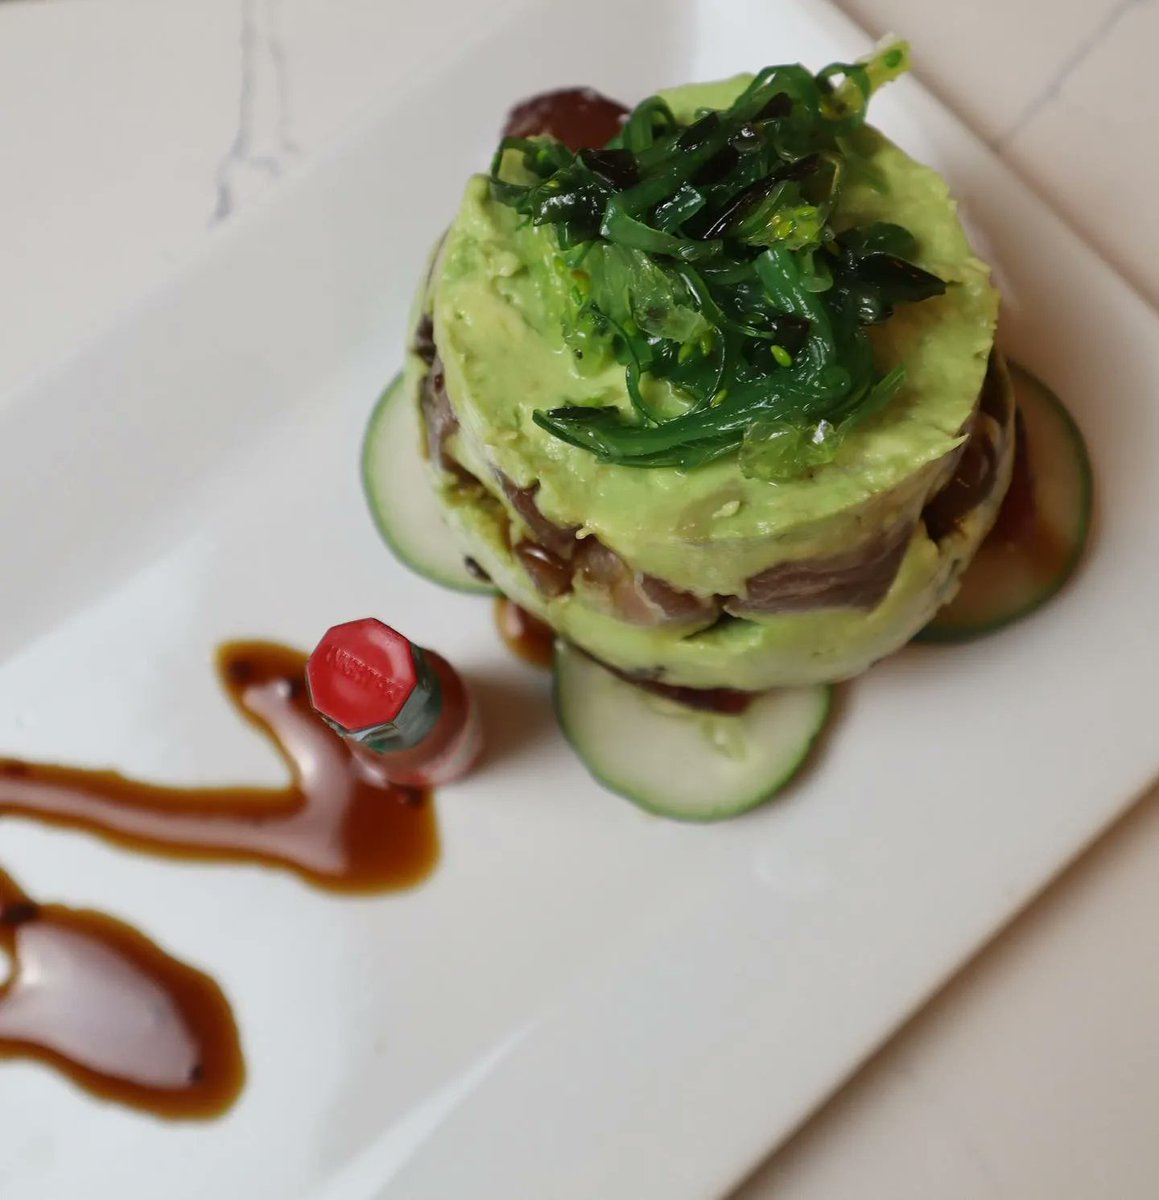 It’s always a good day for Tuna Tartare ✨ Stacked with Soy Honey, Avocado, and Seaweed Salad. 

Come get yours today!
.
.
.
.
#theseacrestgrille #tunatartare #seafood